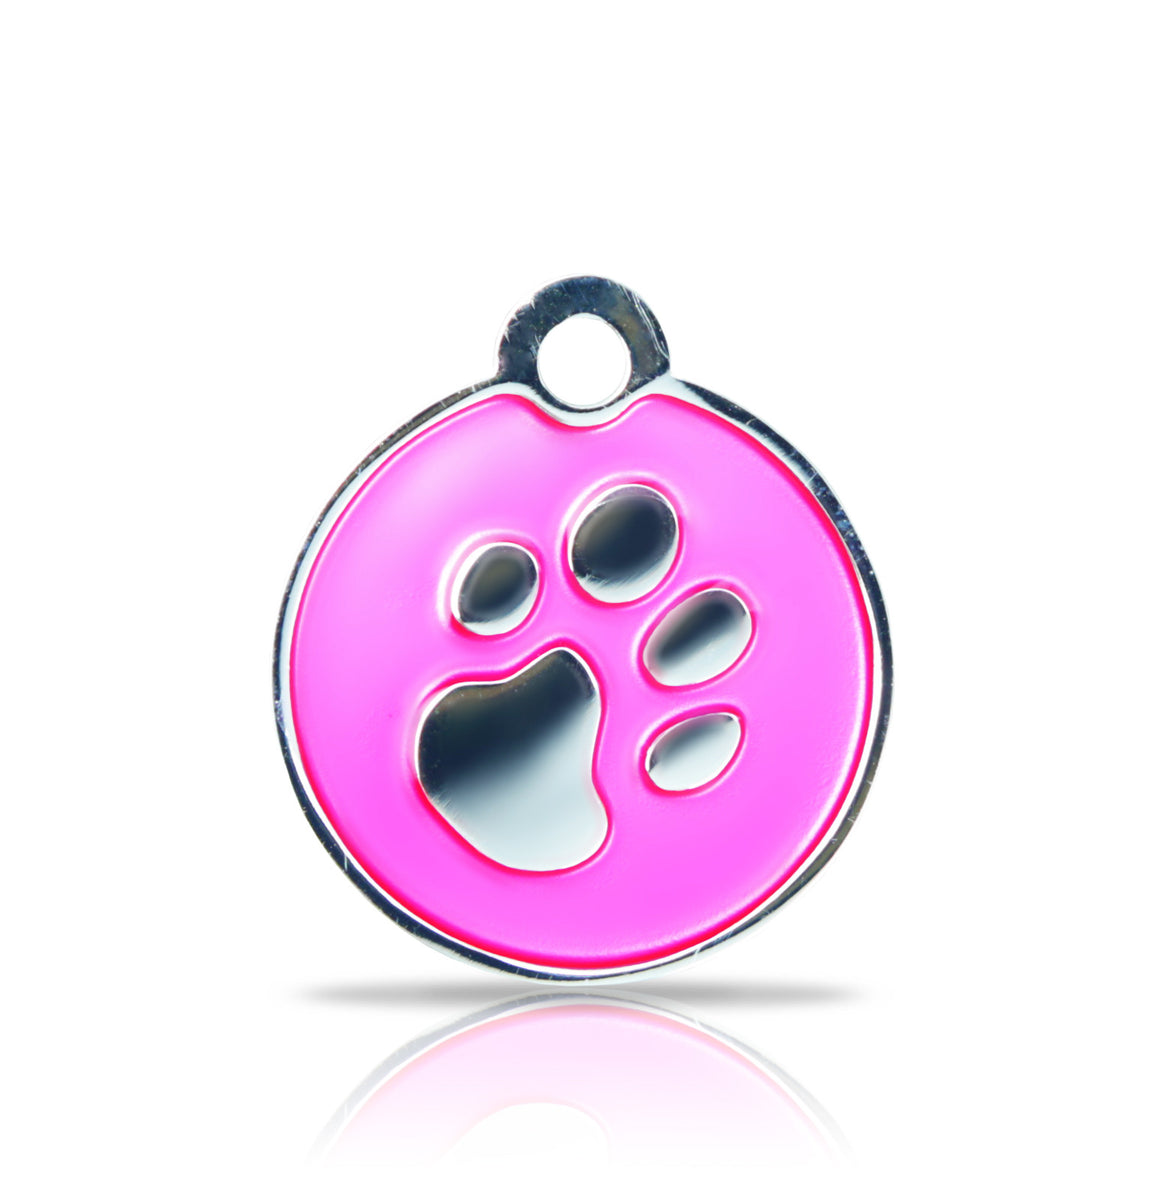 TaggIT Elegance Small Disc Pink & Silver iMarc Pet Tag